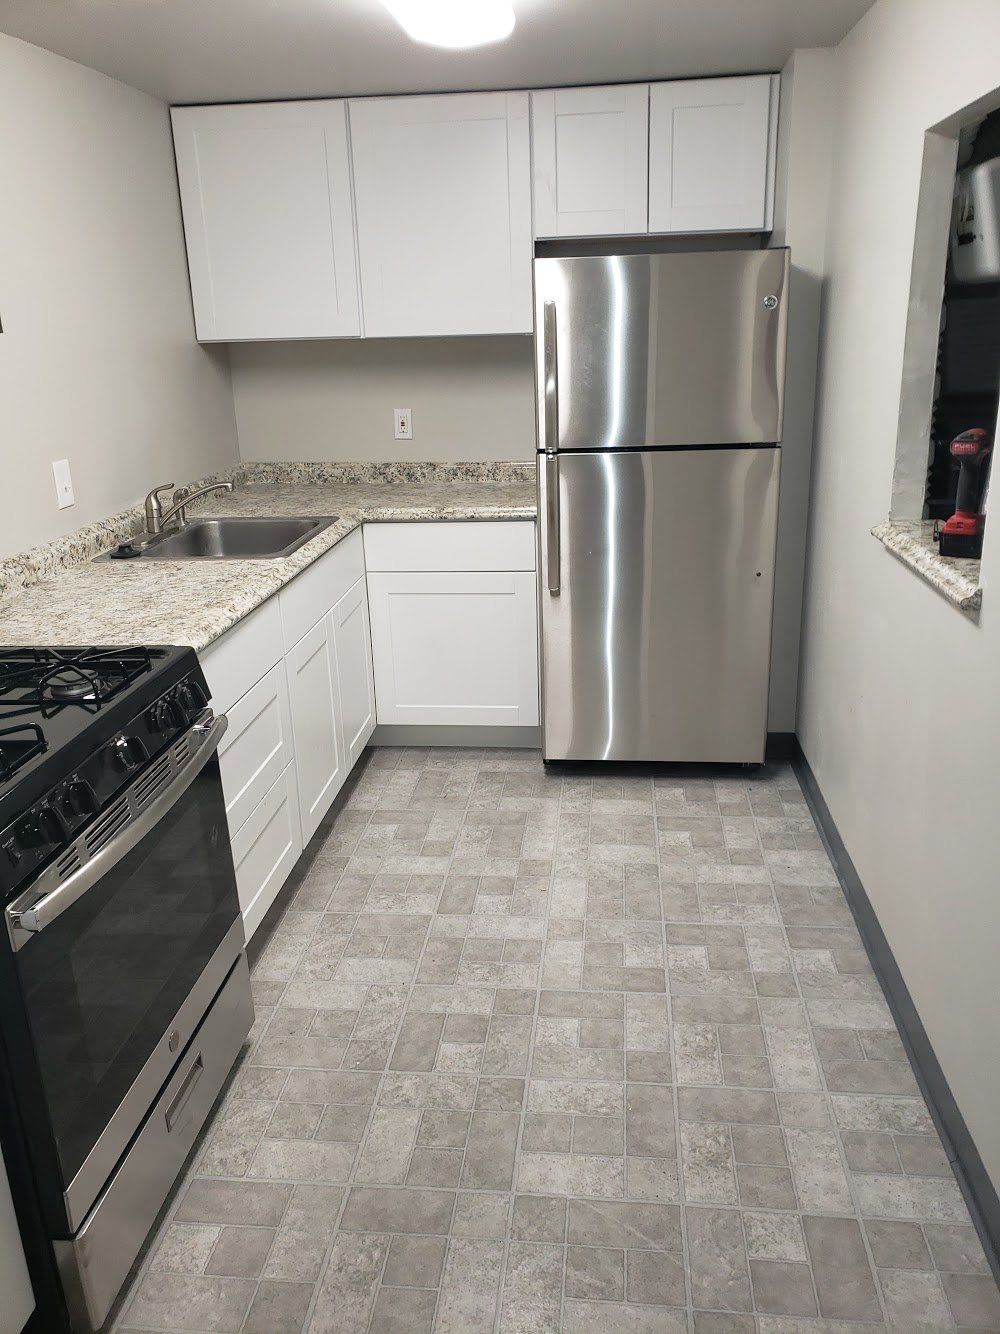 After photo of new tile flooring, appliances and countertop in compact kitchen remodel in a Jenkintown condominium